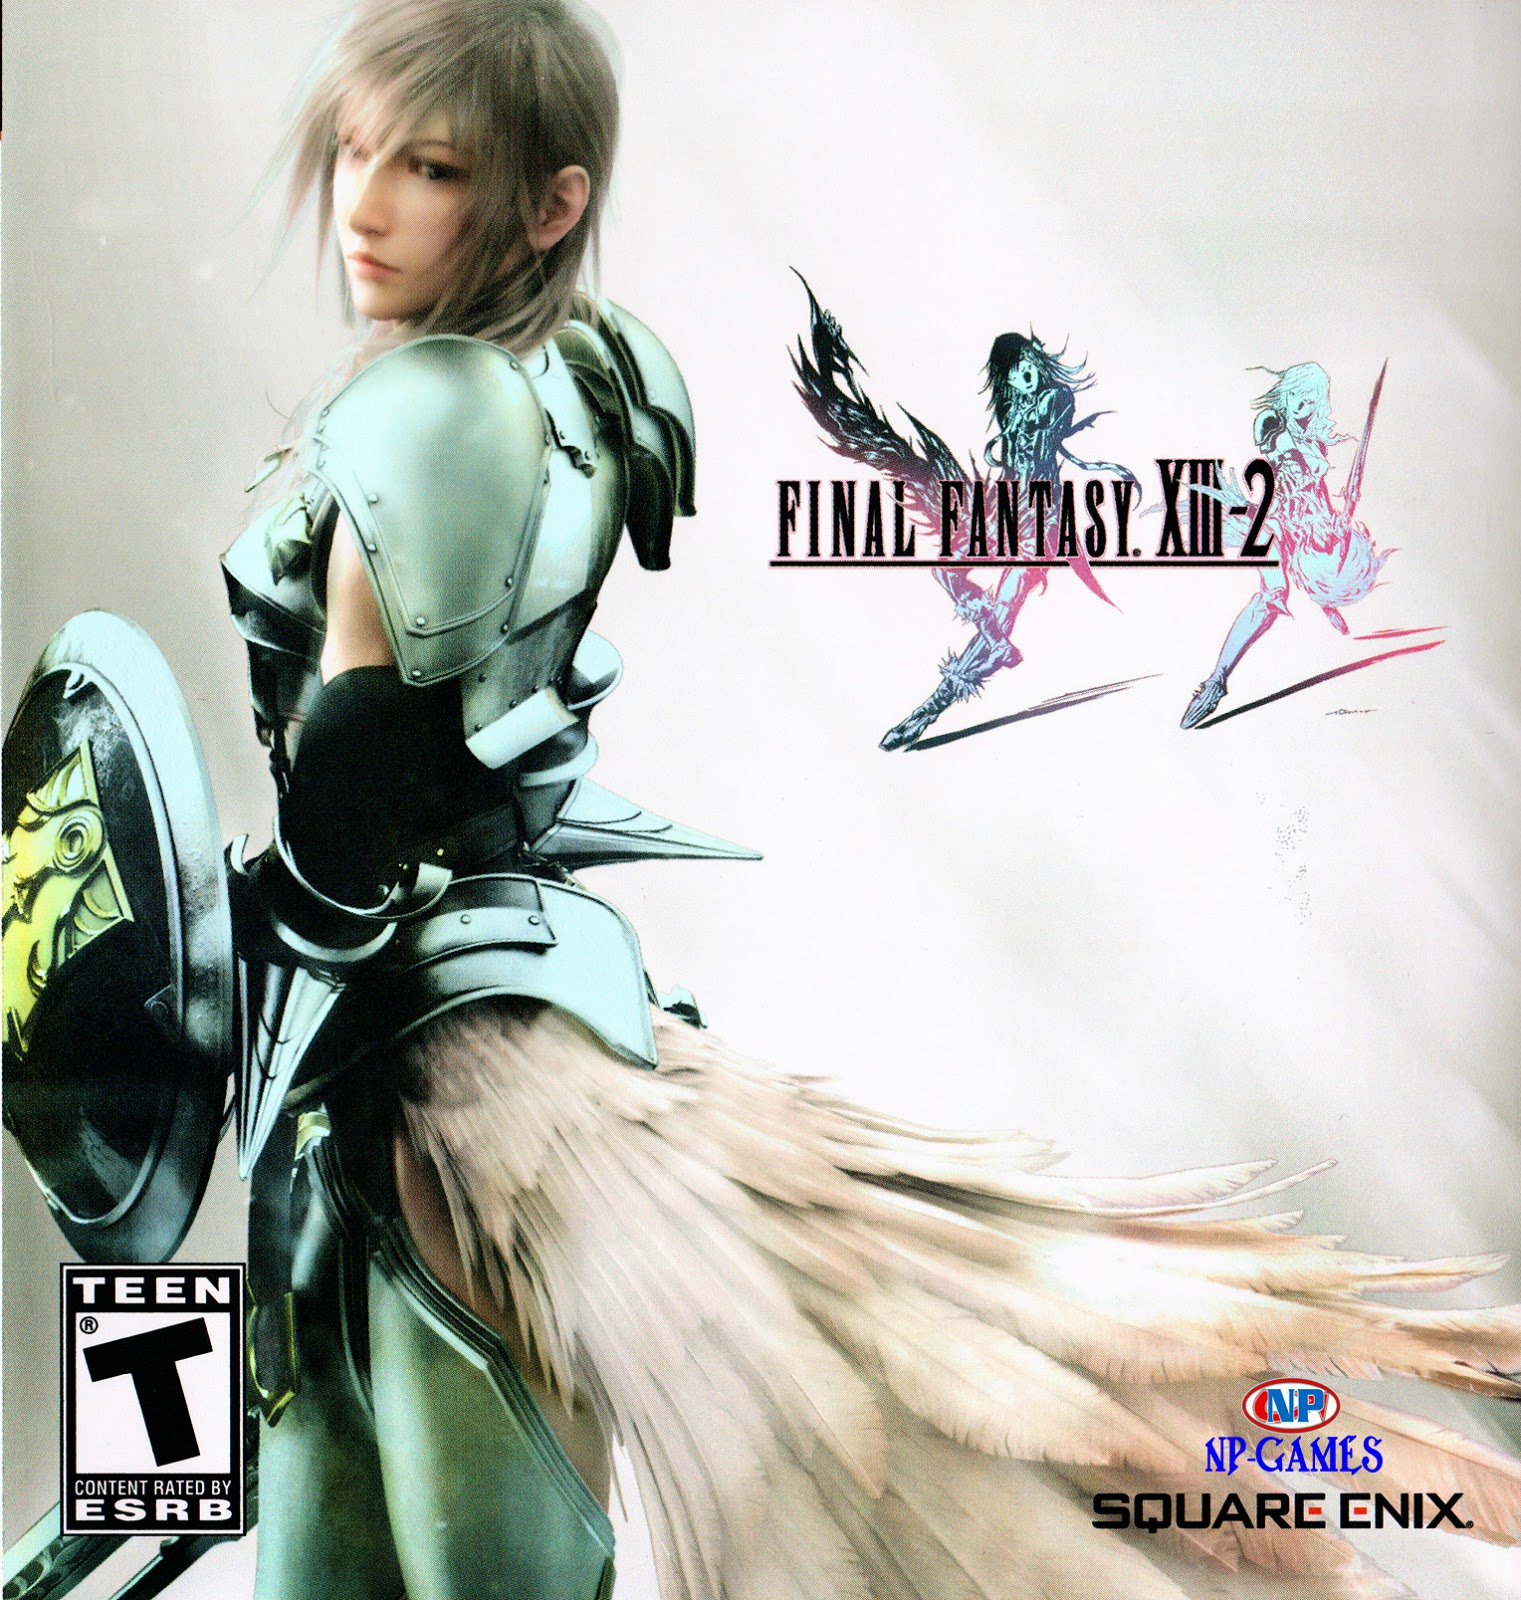 Download Final Fantasy XIII - The Trilogy - RePack by 